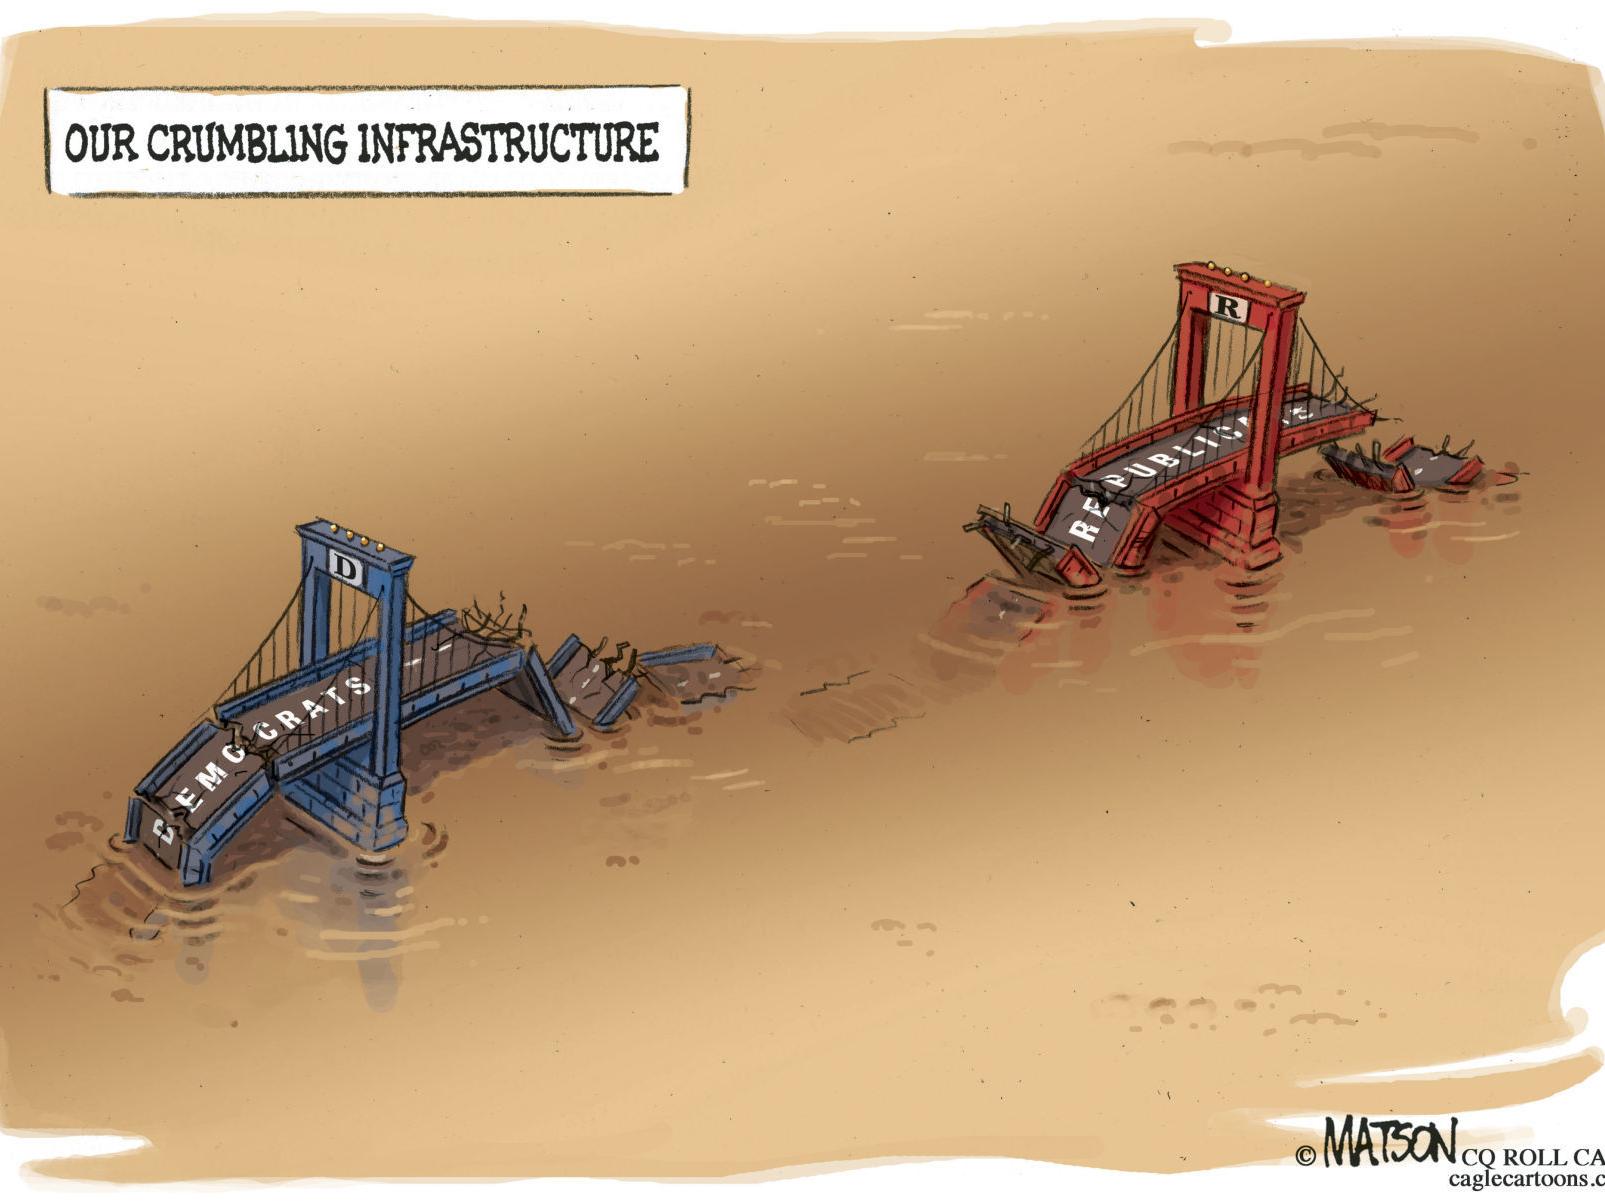 Democrats And Republicans Are America S Crumbling Infrastructure In R J Matson S Latest Political Cartoon Opinion Cartoon Madison Com